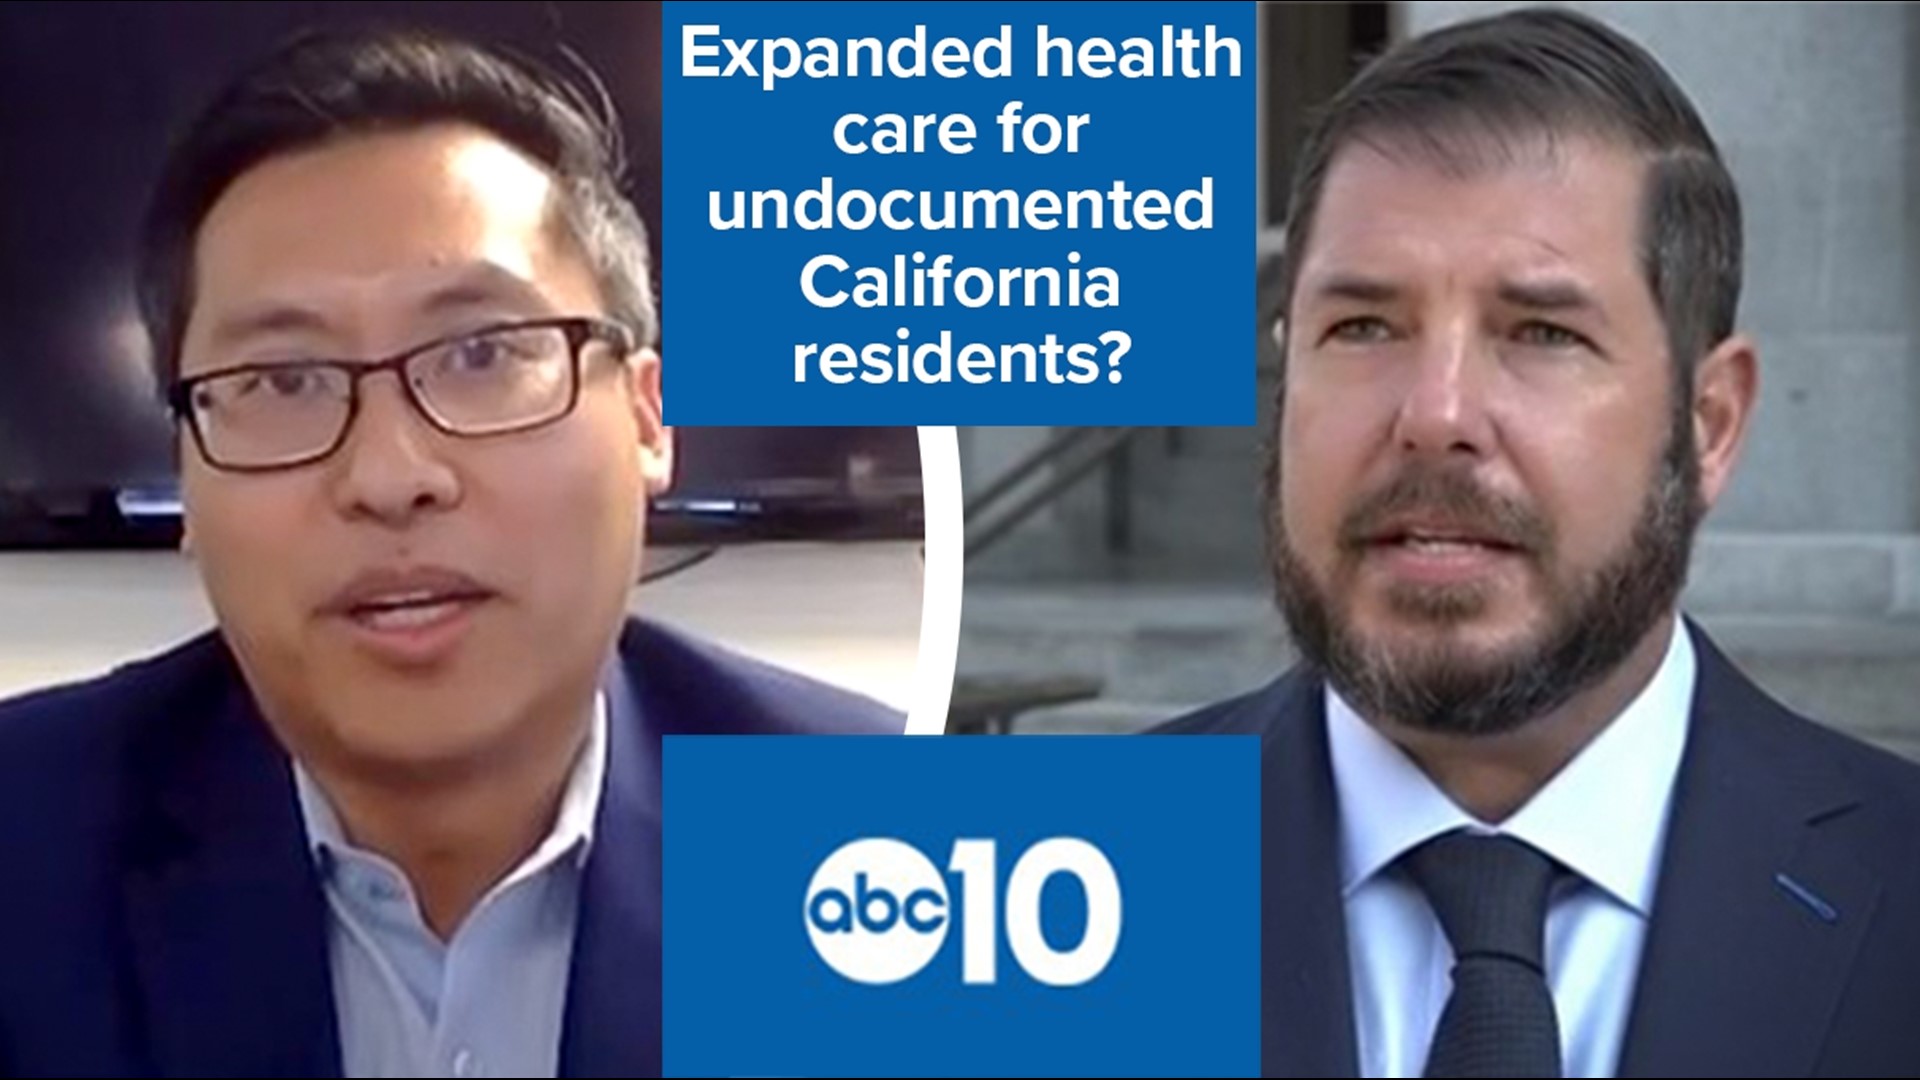 As some California legislators are still unconvinced of Newsom's budget proposals, the debate around health care for undocumented immigrants goes on.